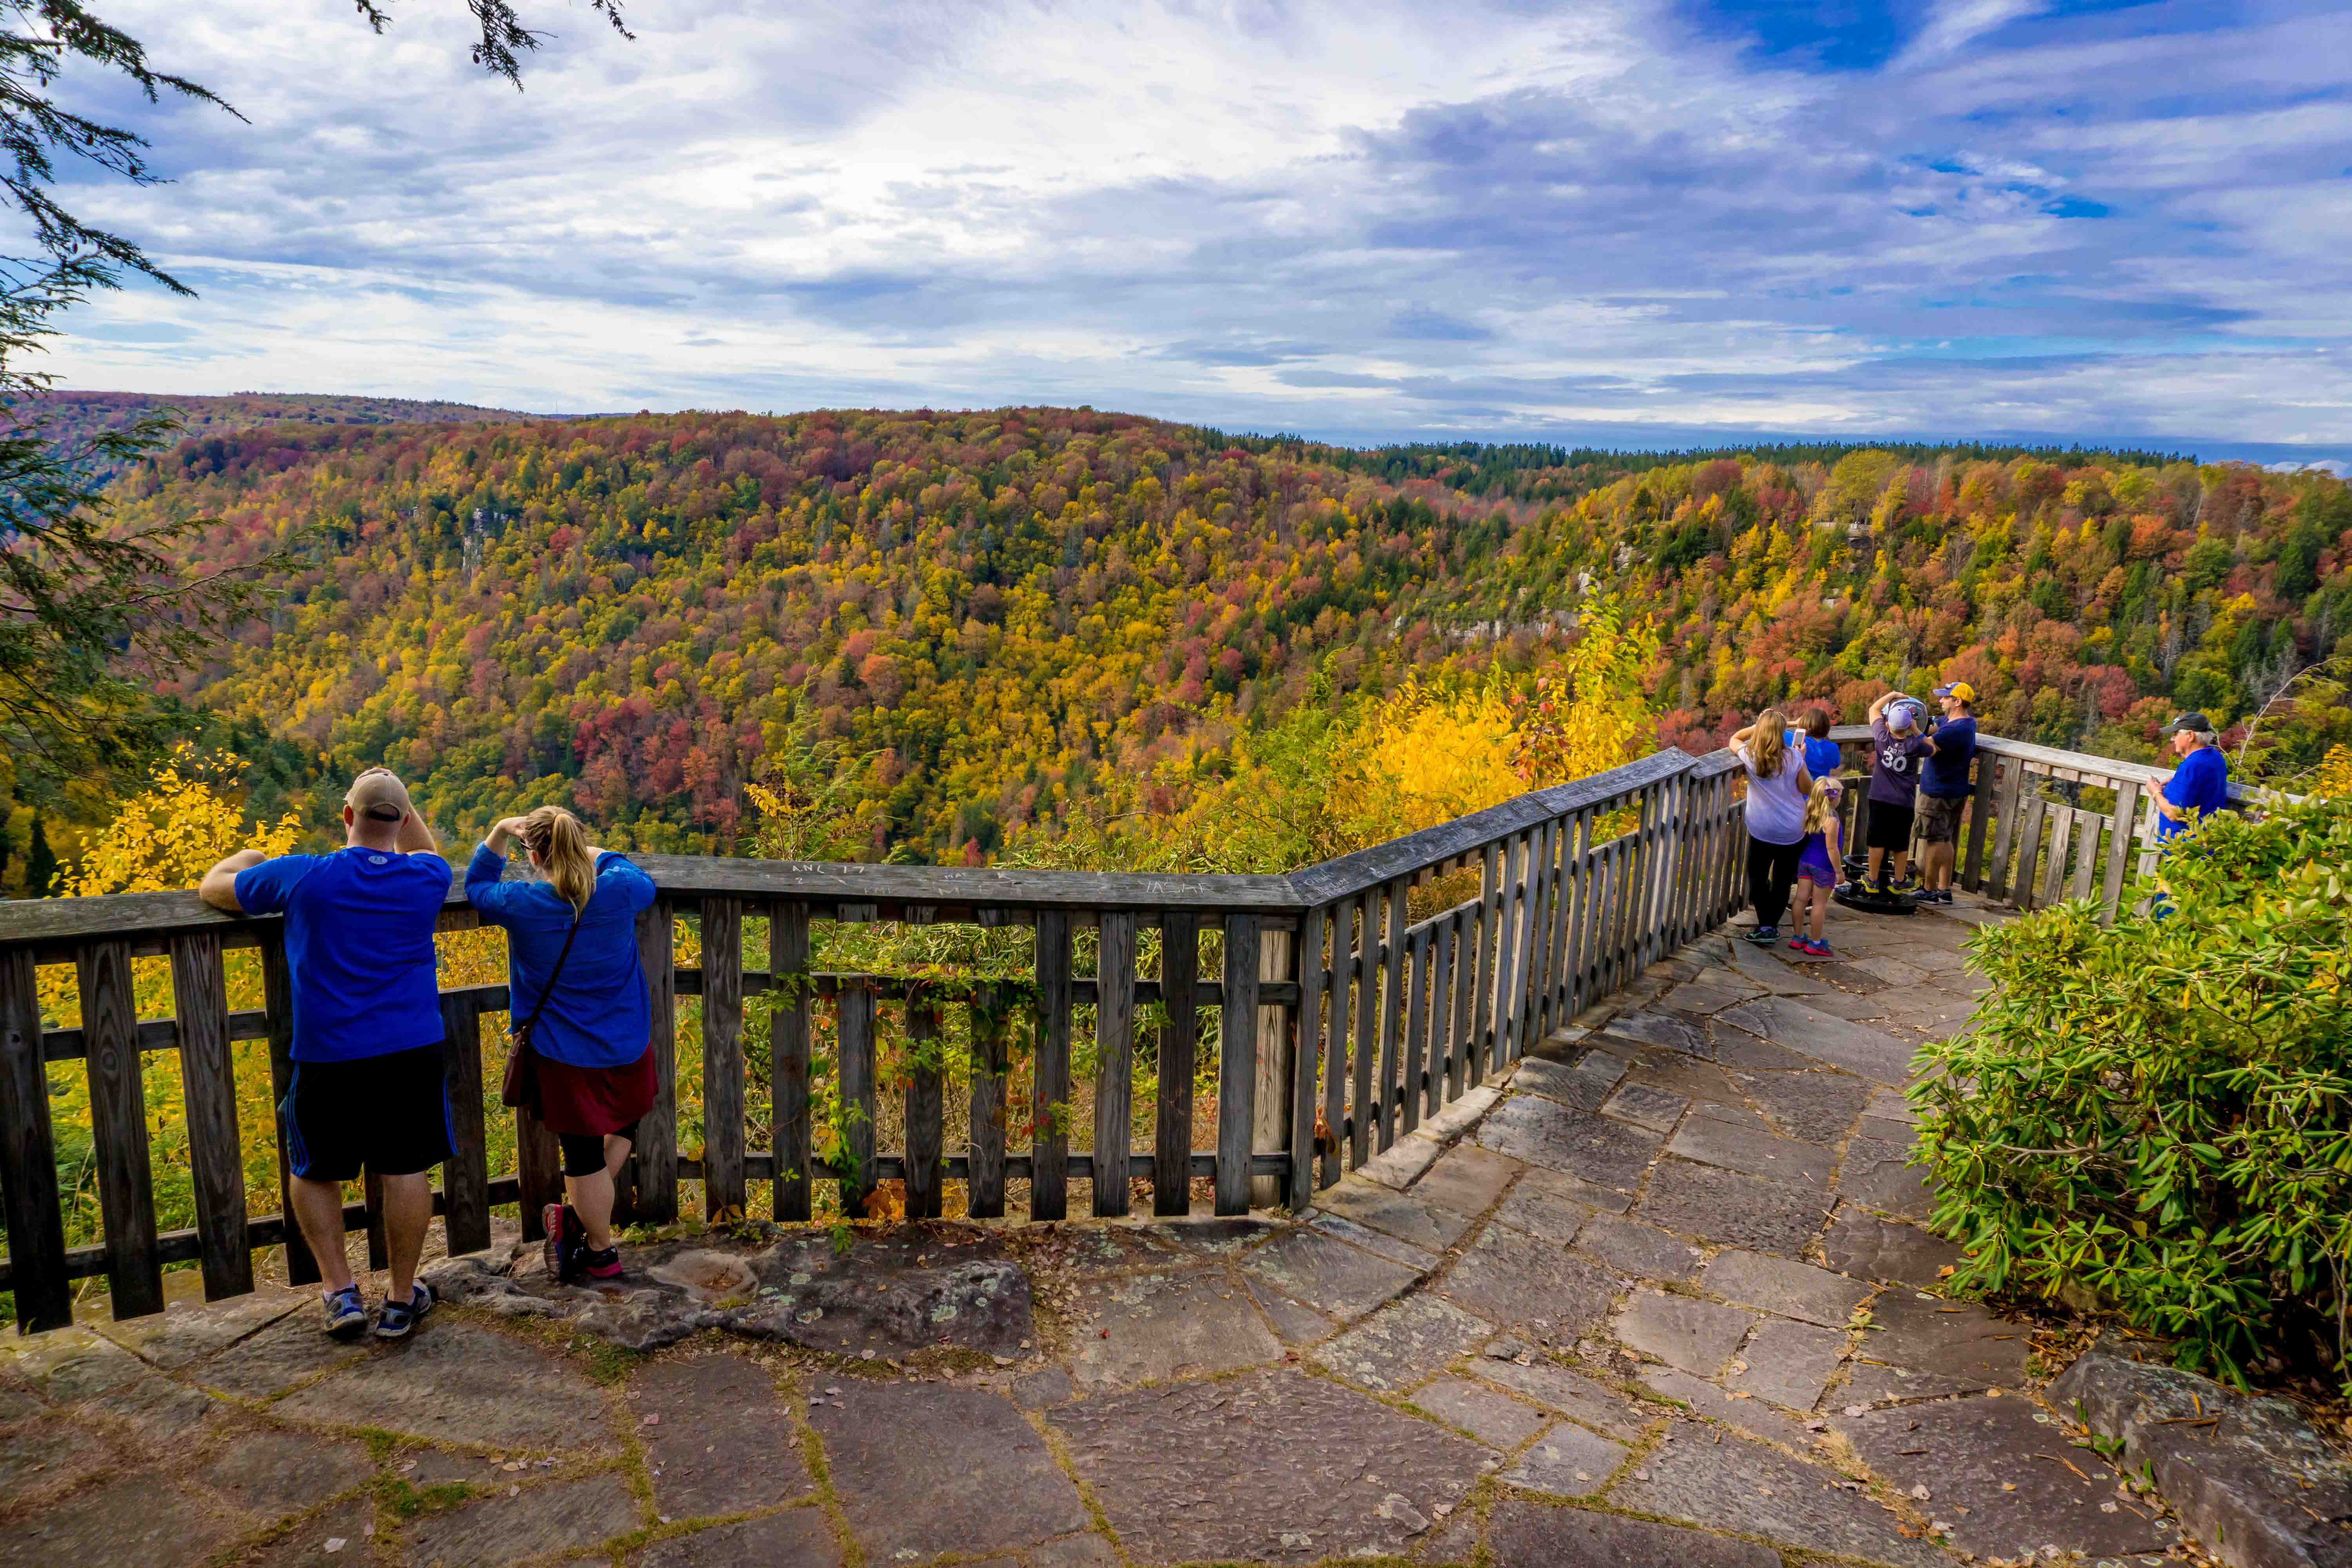 Fall Foliage peaks color in the Blackwater Canyon at Blackwater Falls State Park, West Virginia.